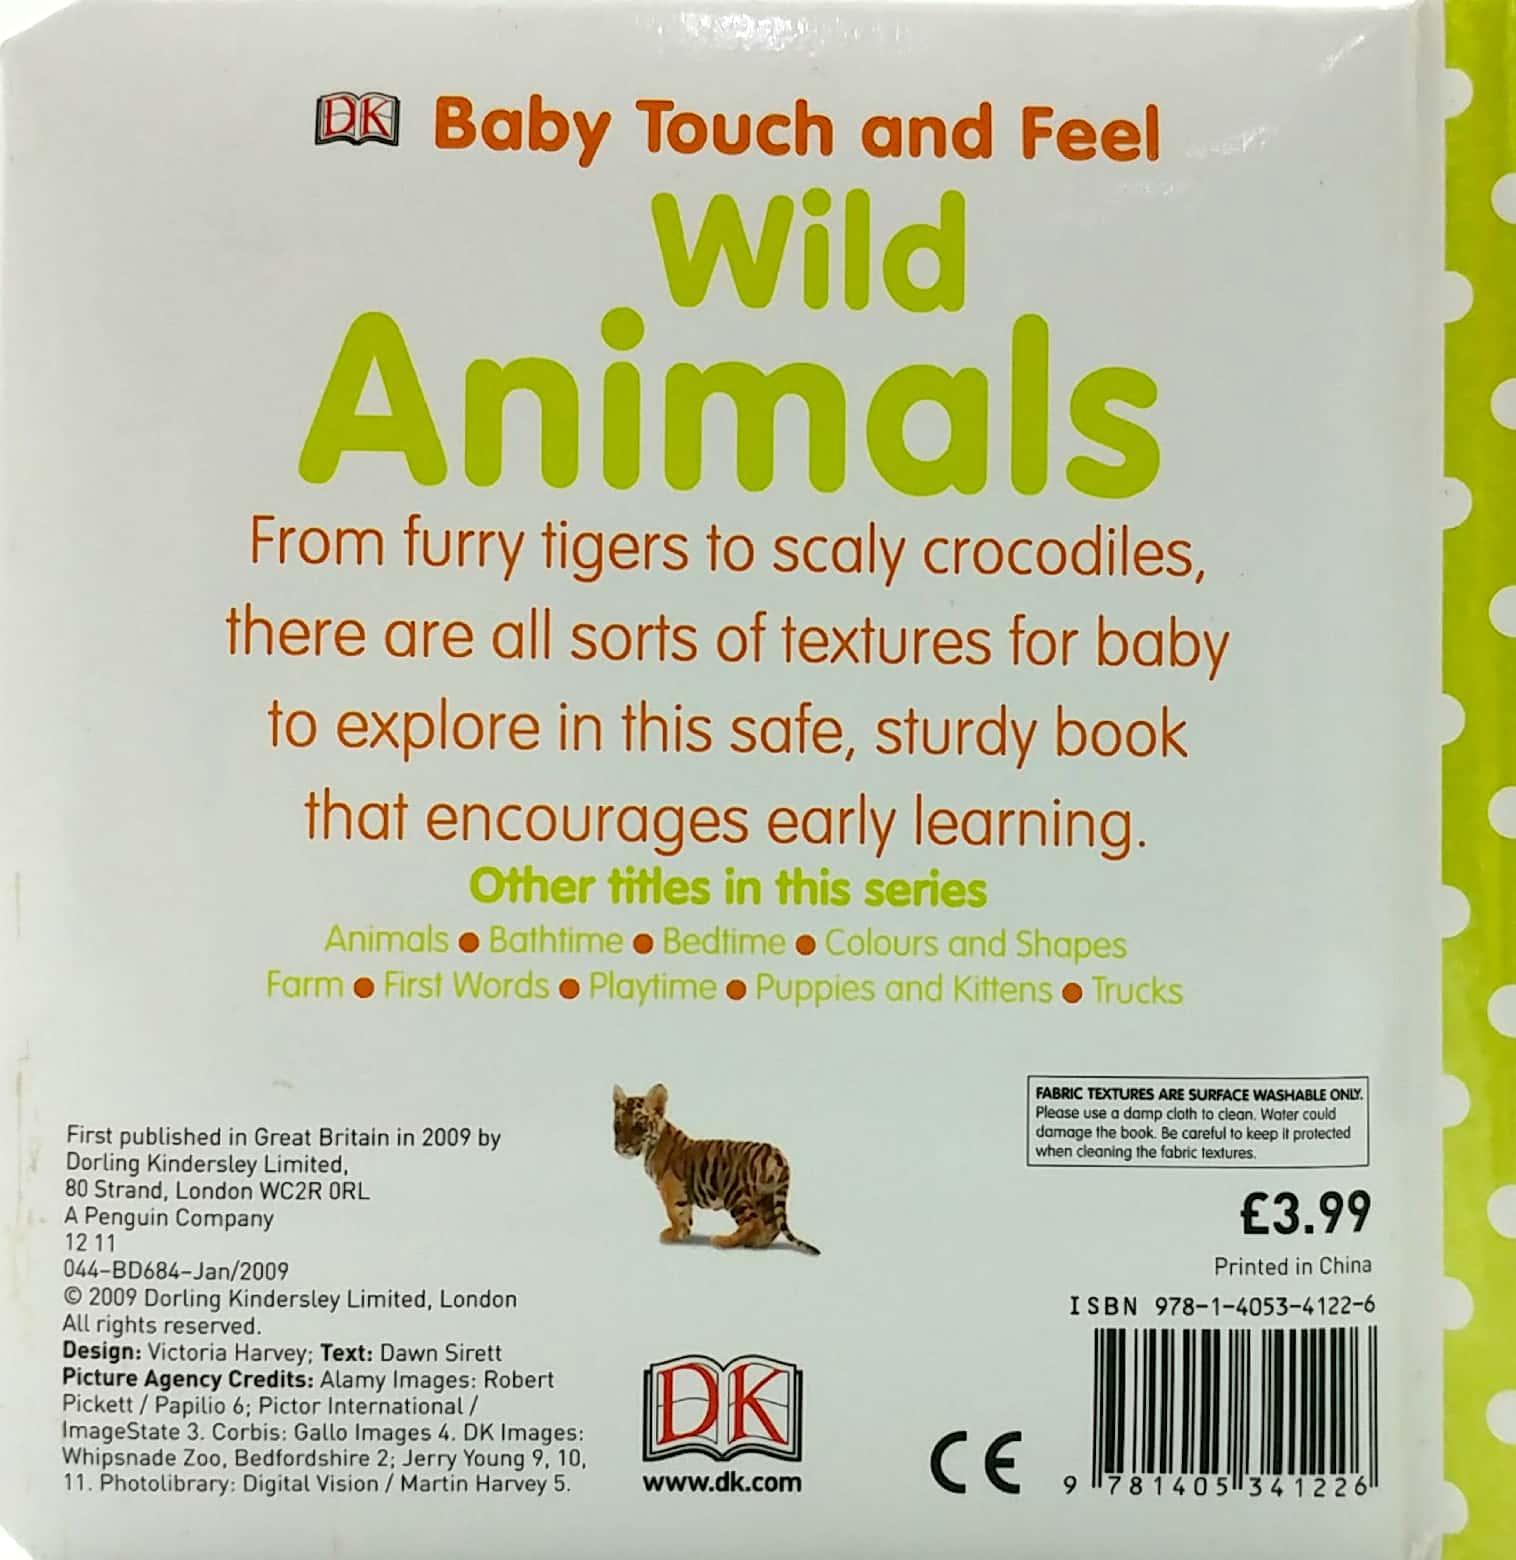 DK Wild Animals (Series Baby Touch And Feel)